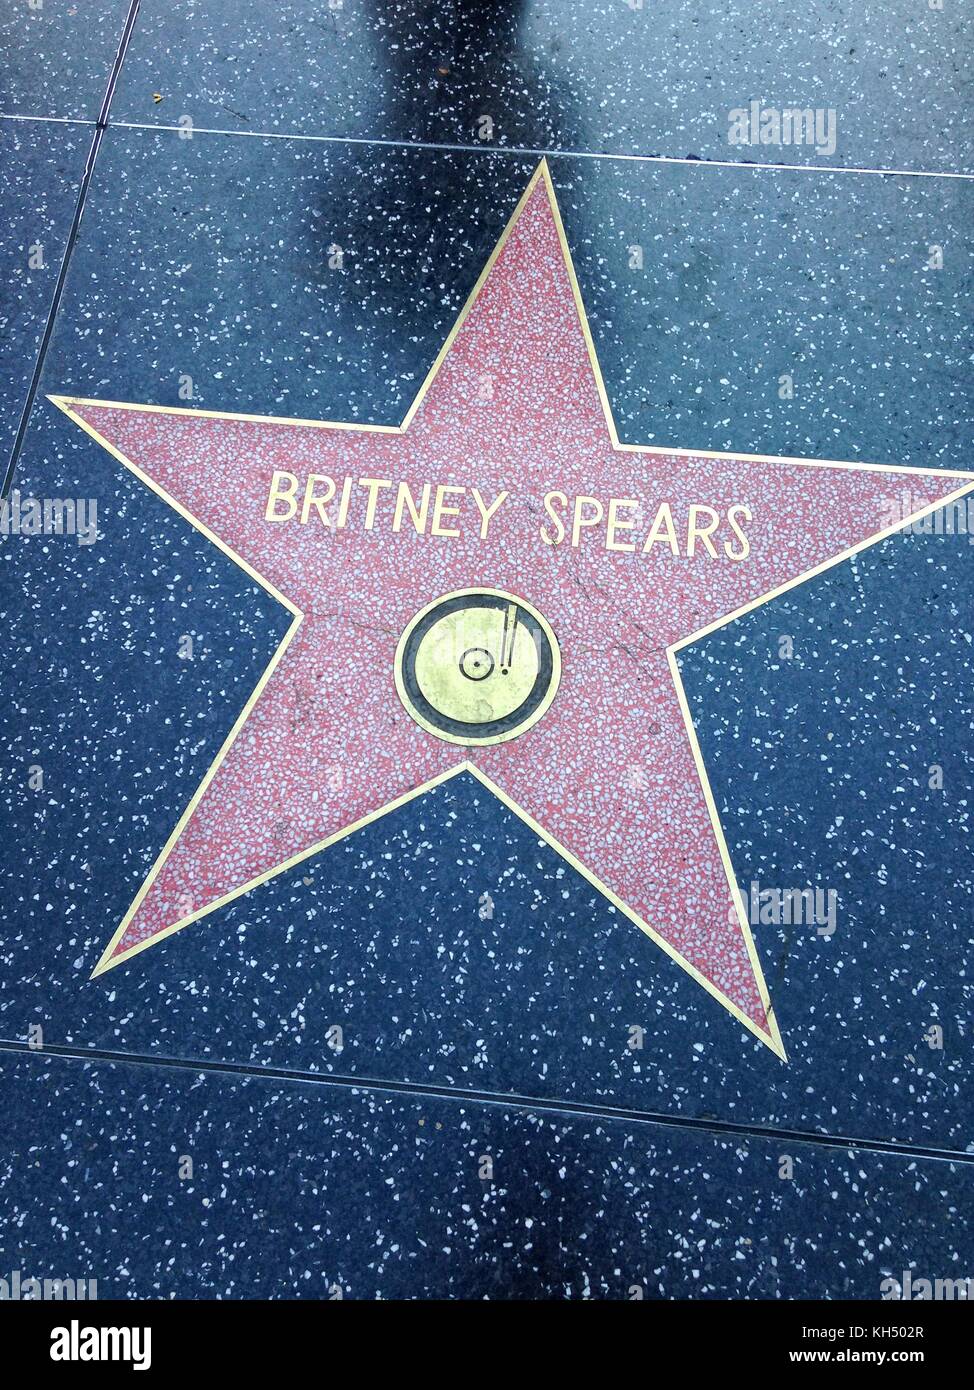 Hollywood, California - July 26 2017: Britney Spears Hollywood walk of fame star on July 26, 2017 in Hollywood, CA. Stock Photo